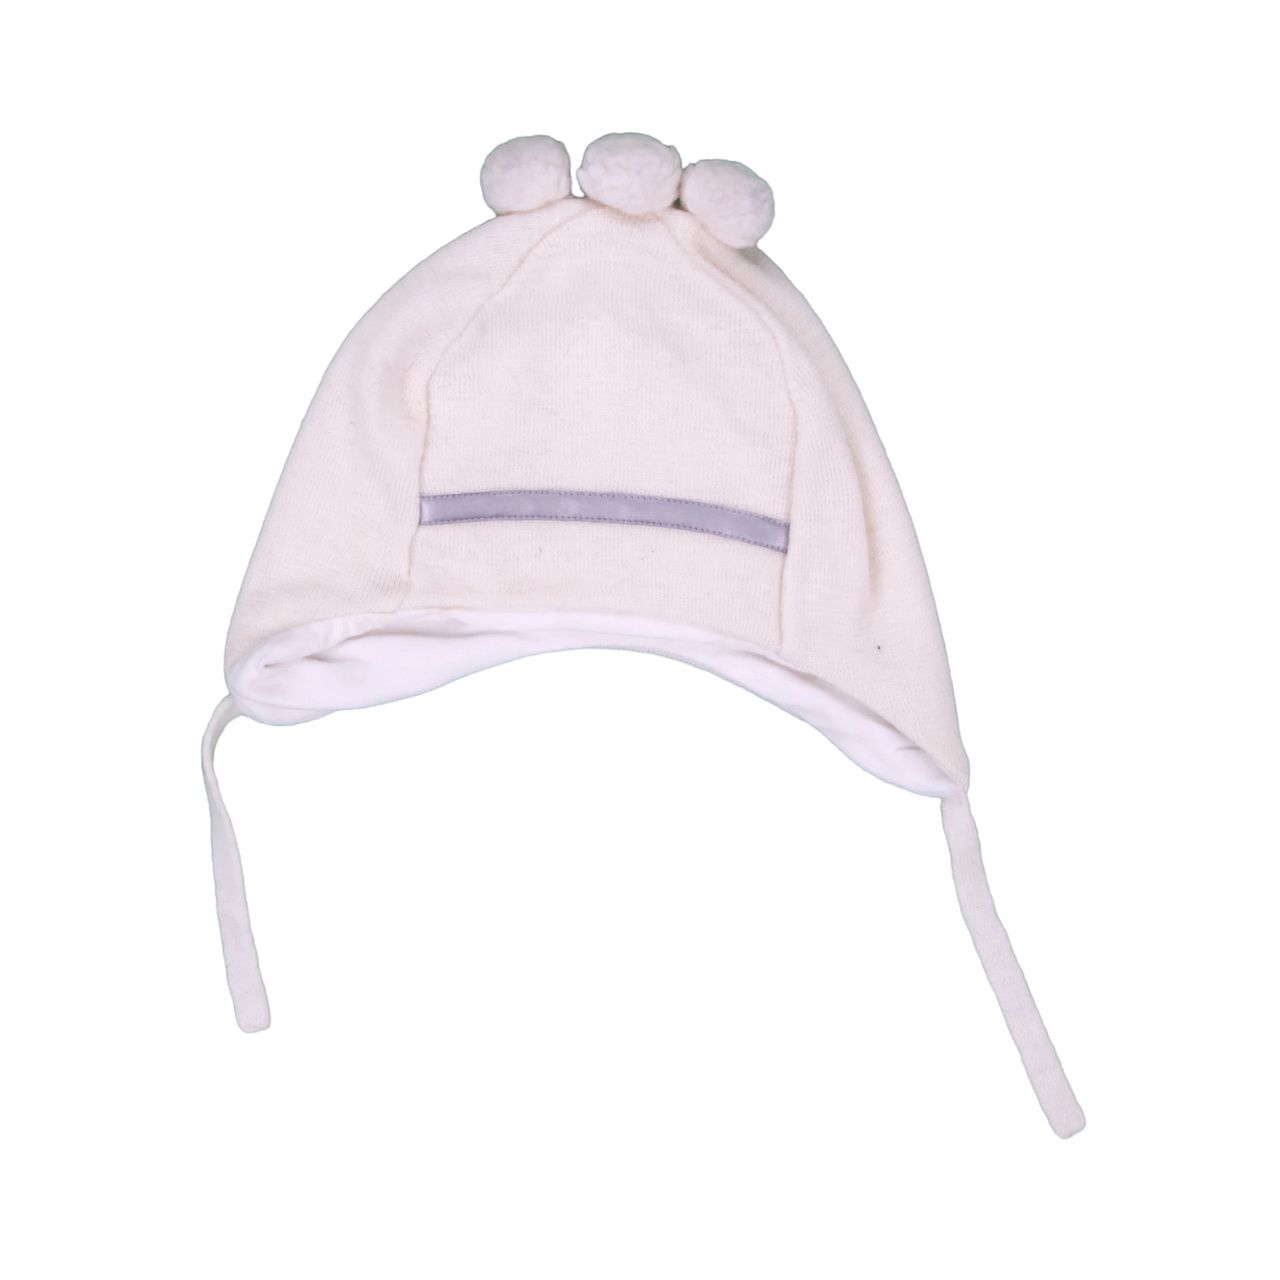 Reima Hat 44 - 46 cm front preview